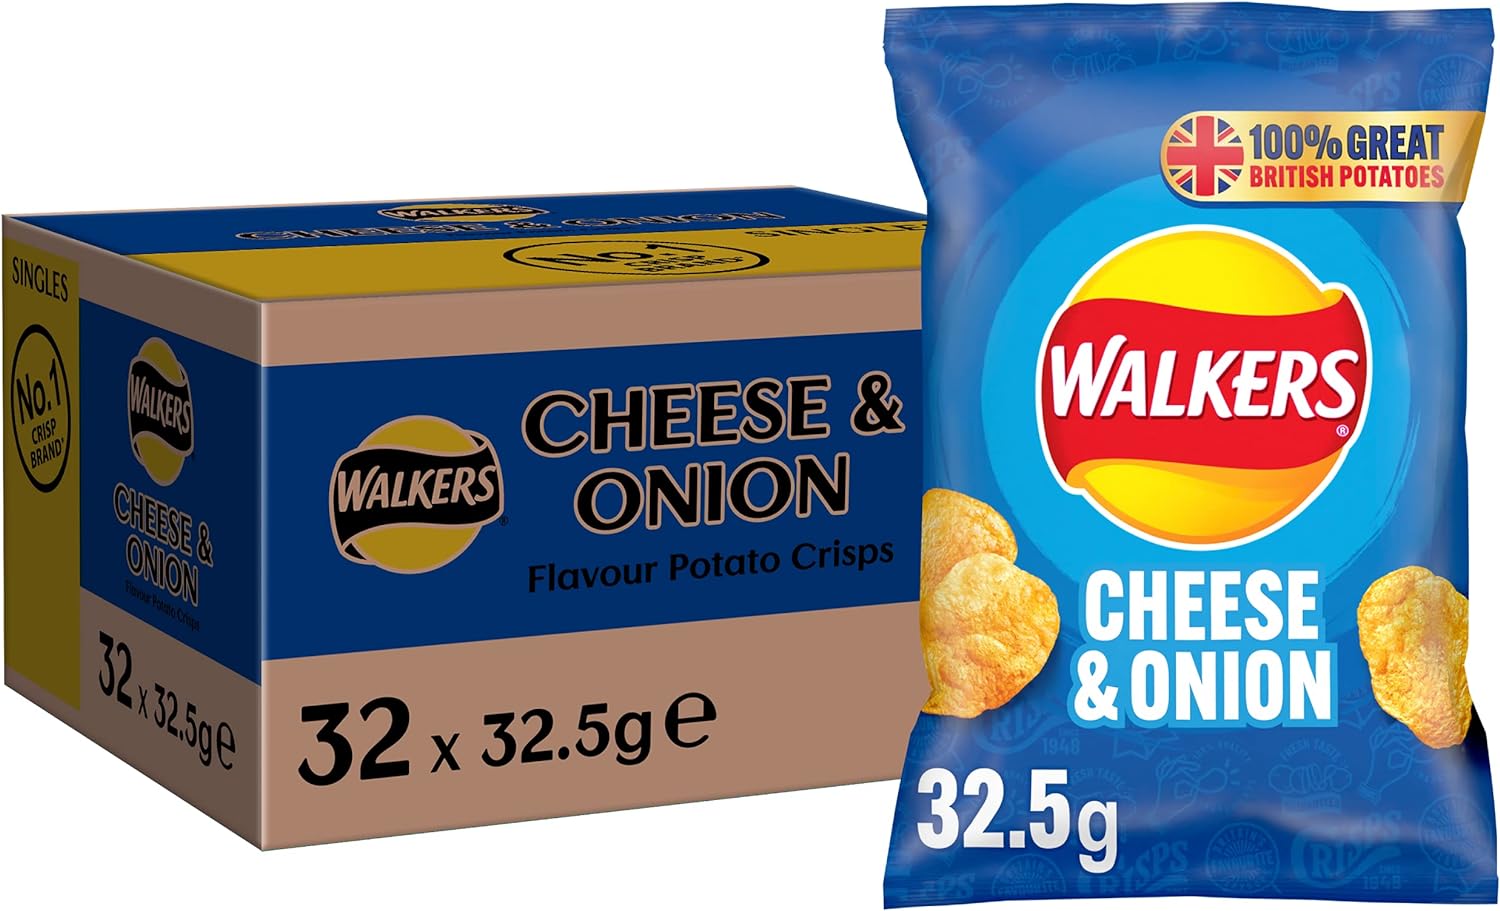 Walkers Cheese & Onion Crisps - 32.5g - Pack of 32